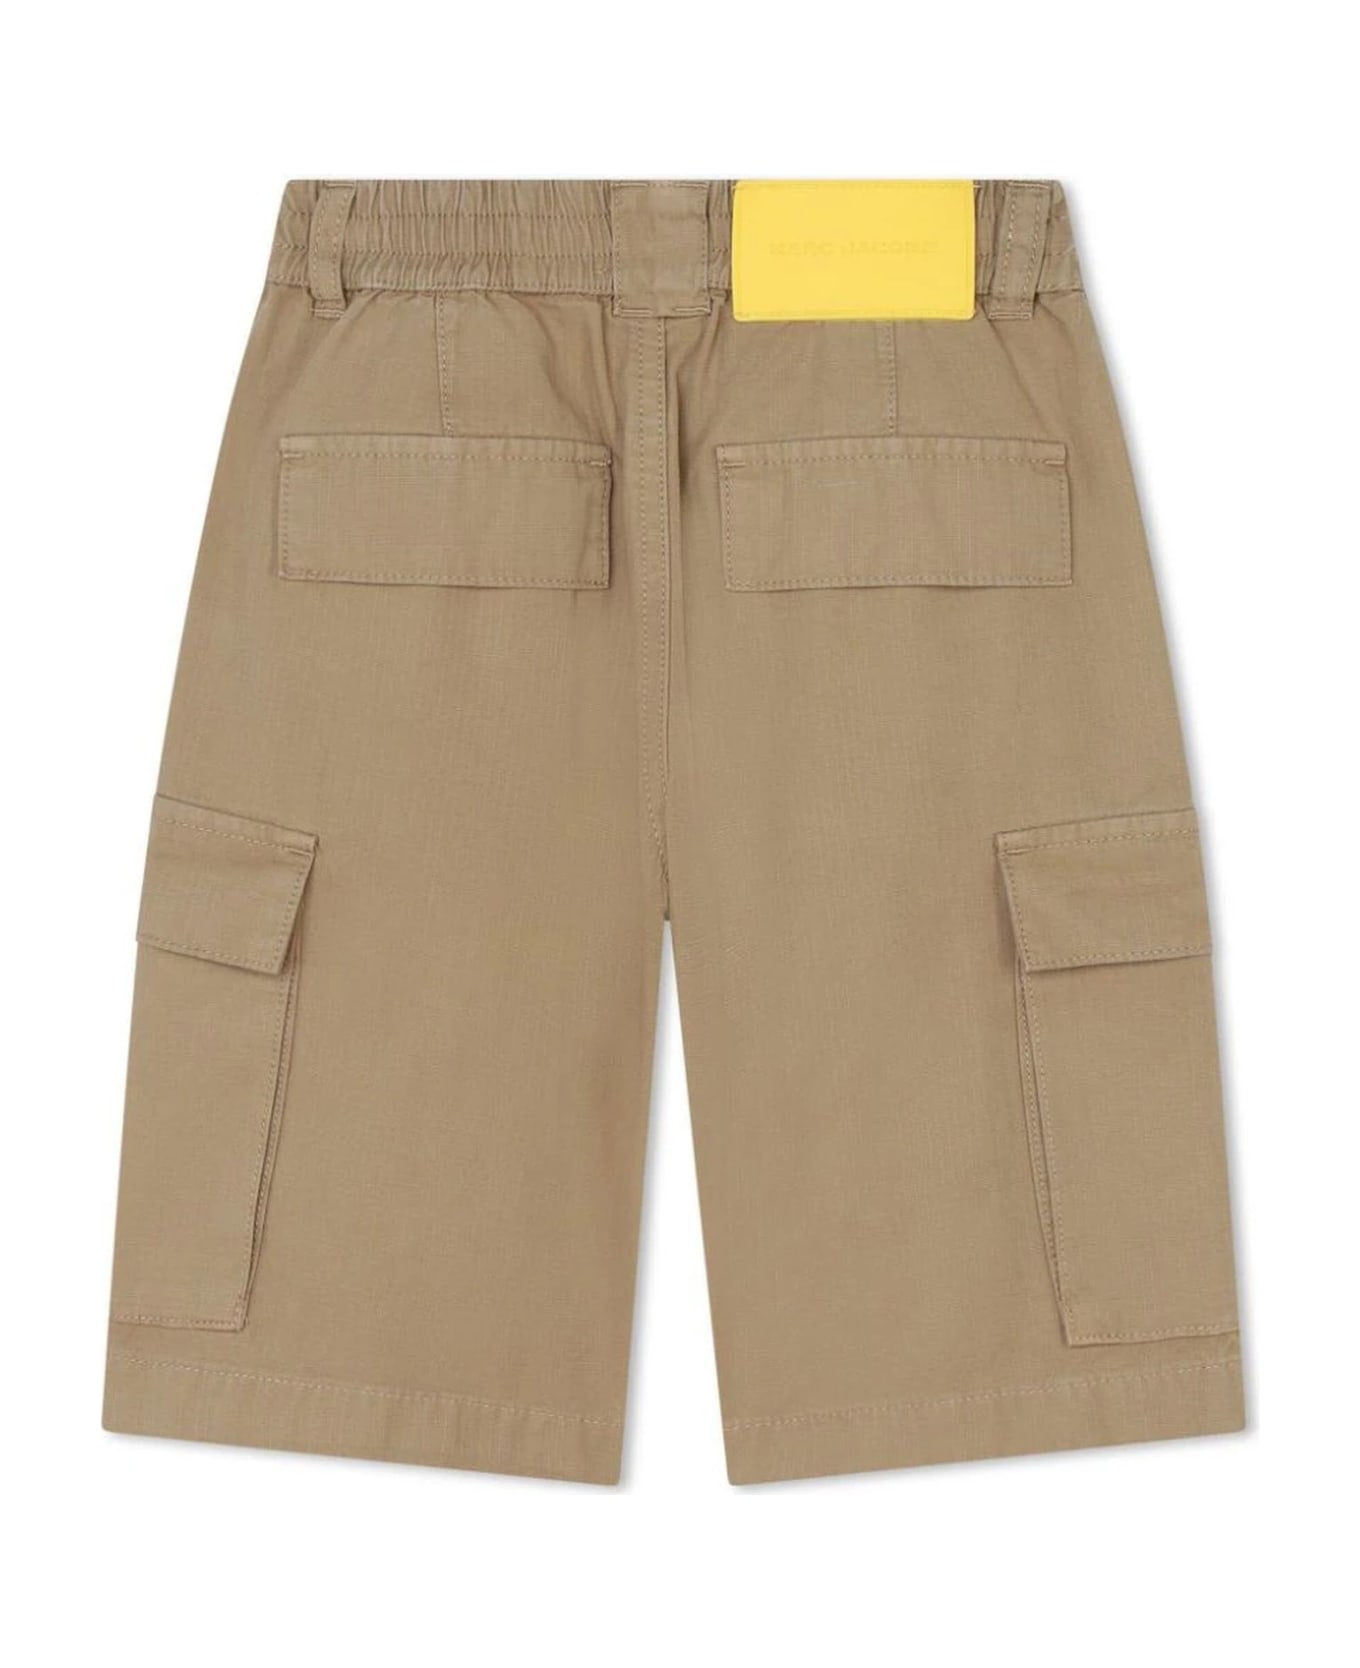 Marc Jacobs Shorts Brown - Brown ボトムス